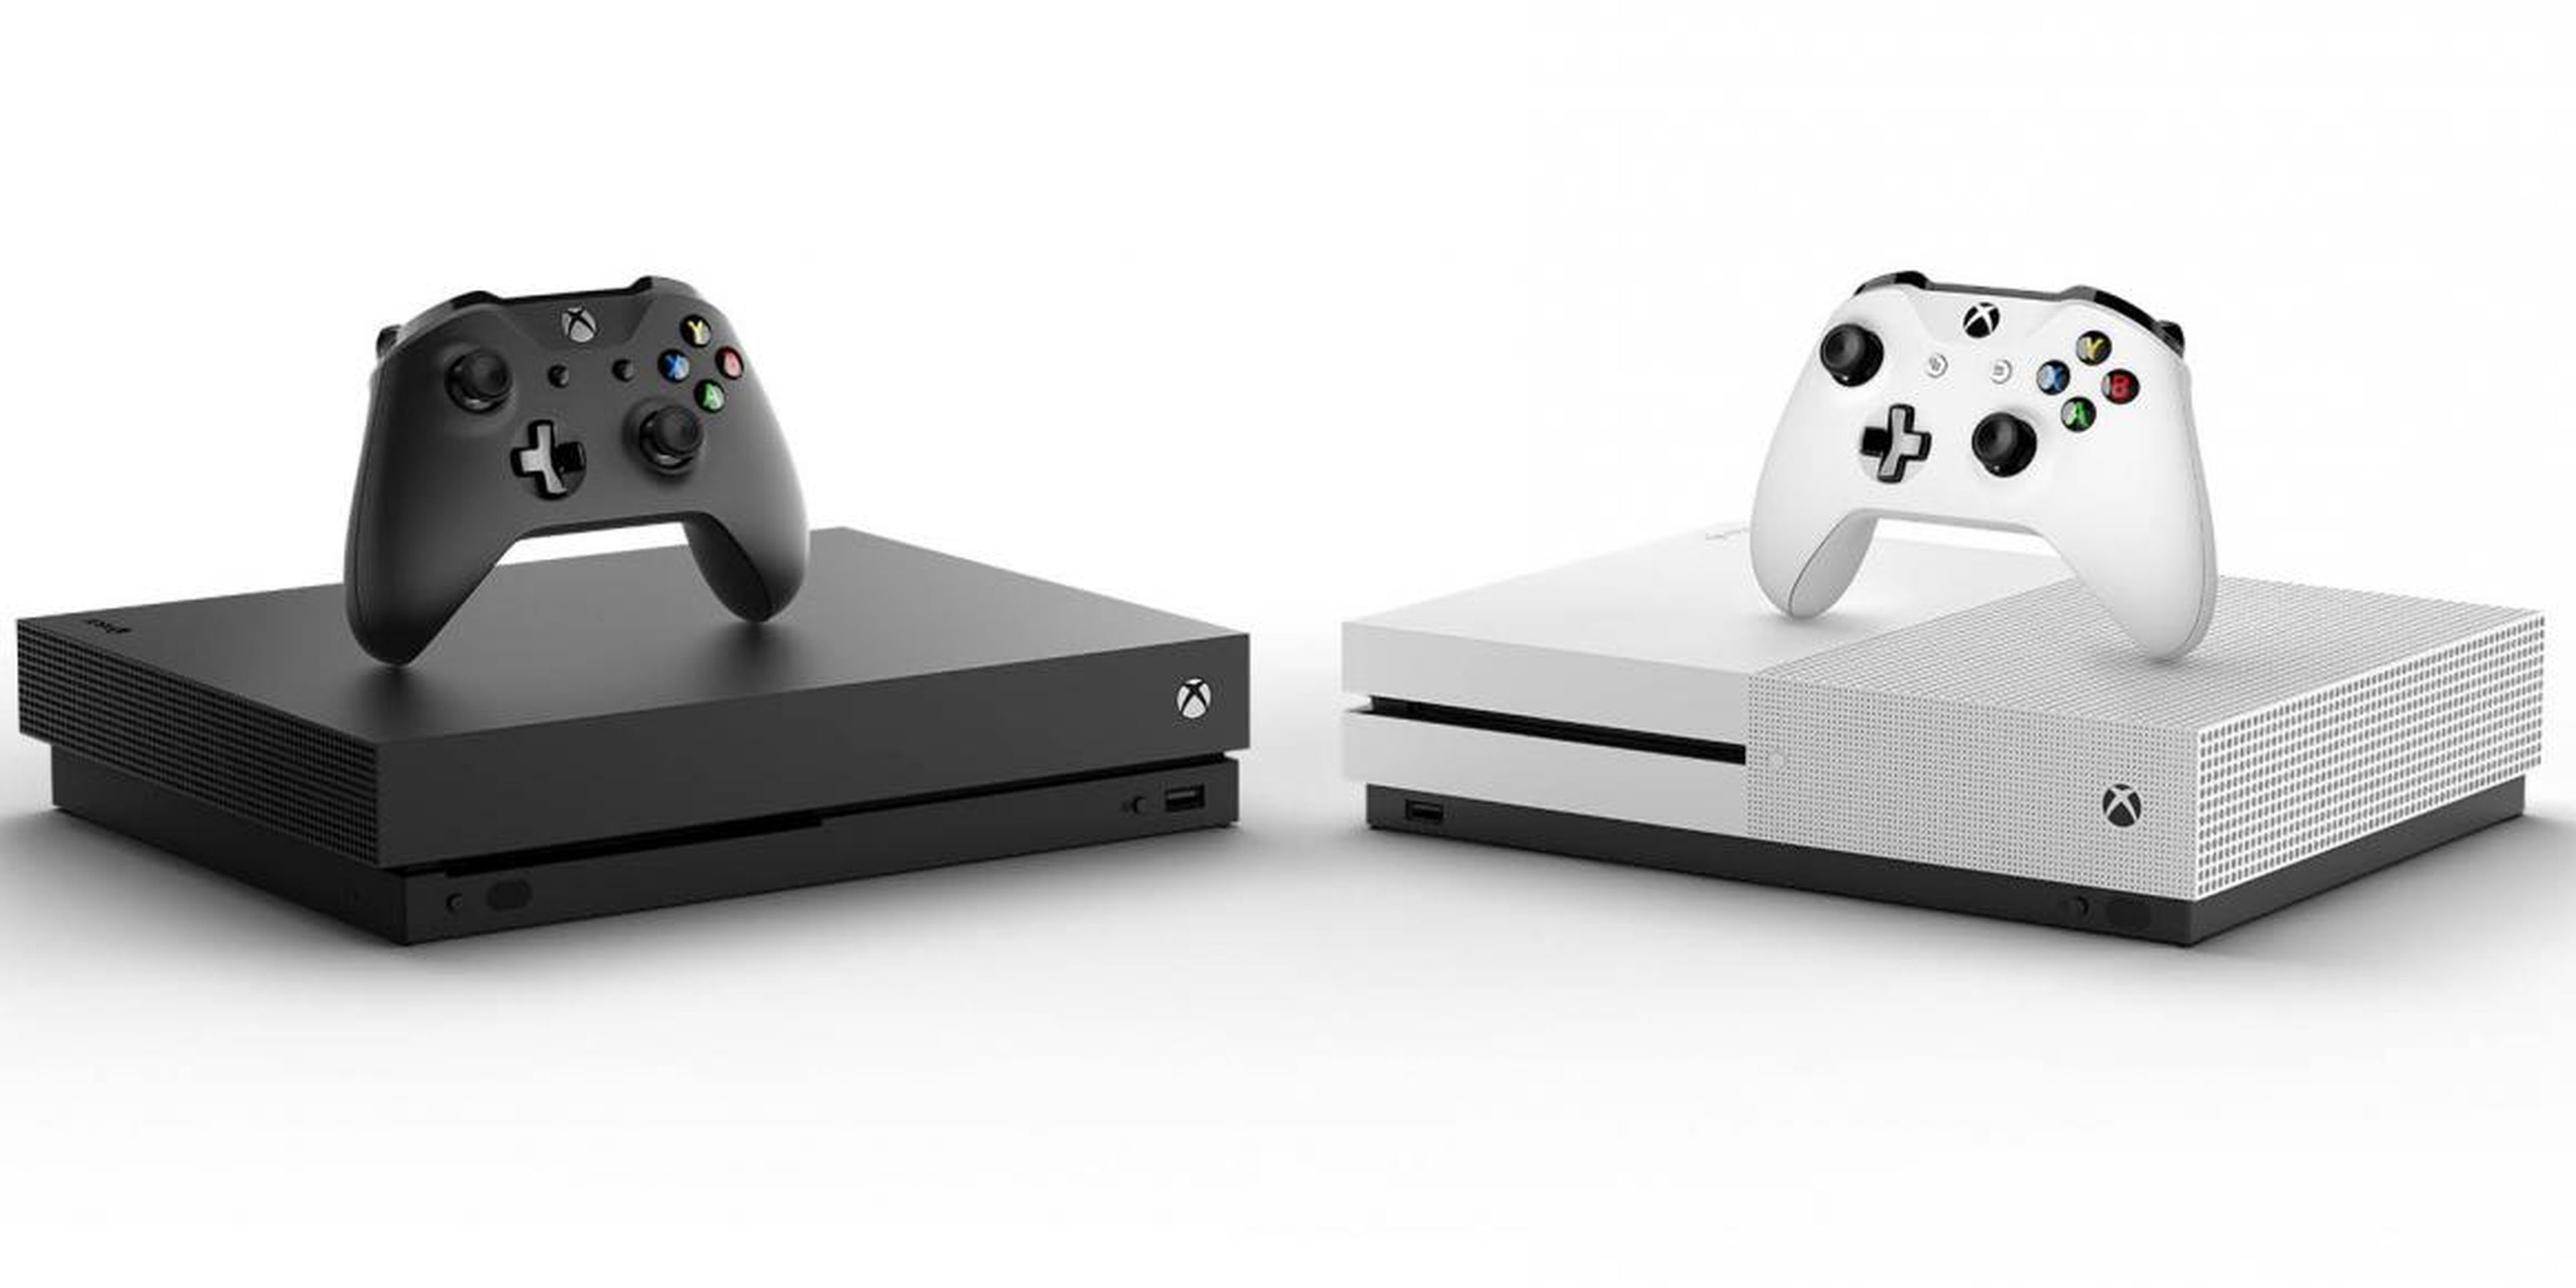 The Xbox One X (left) and Xbox One S (right) offer two different price points and horsepower options for prospective buyers.